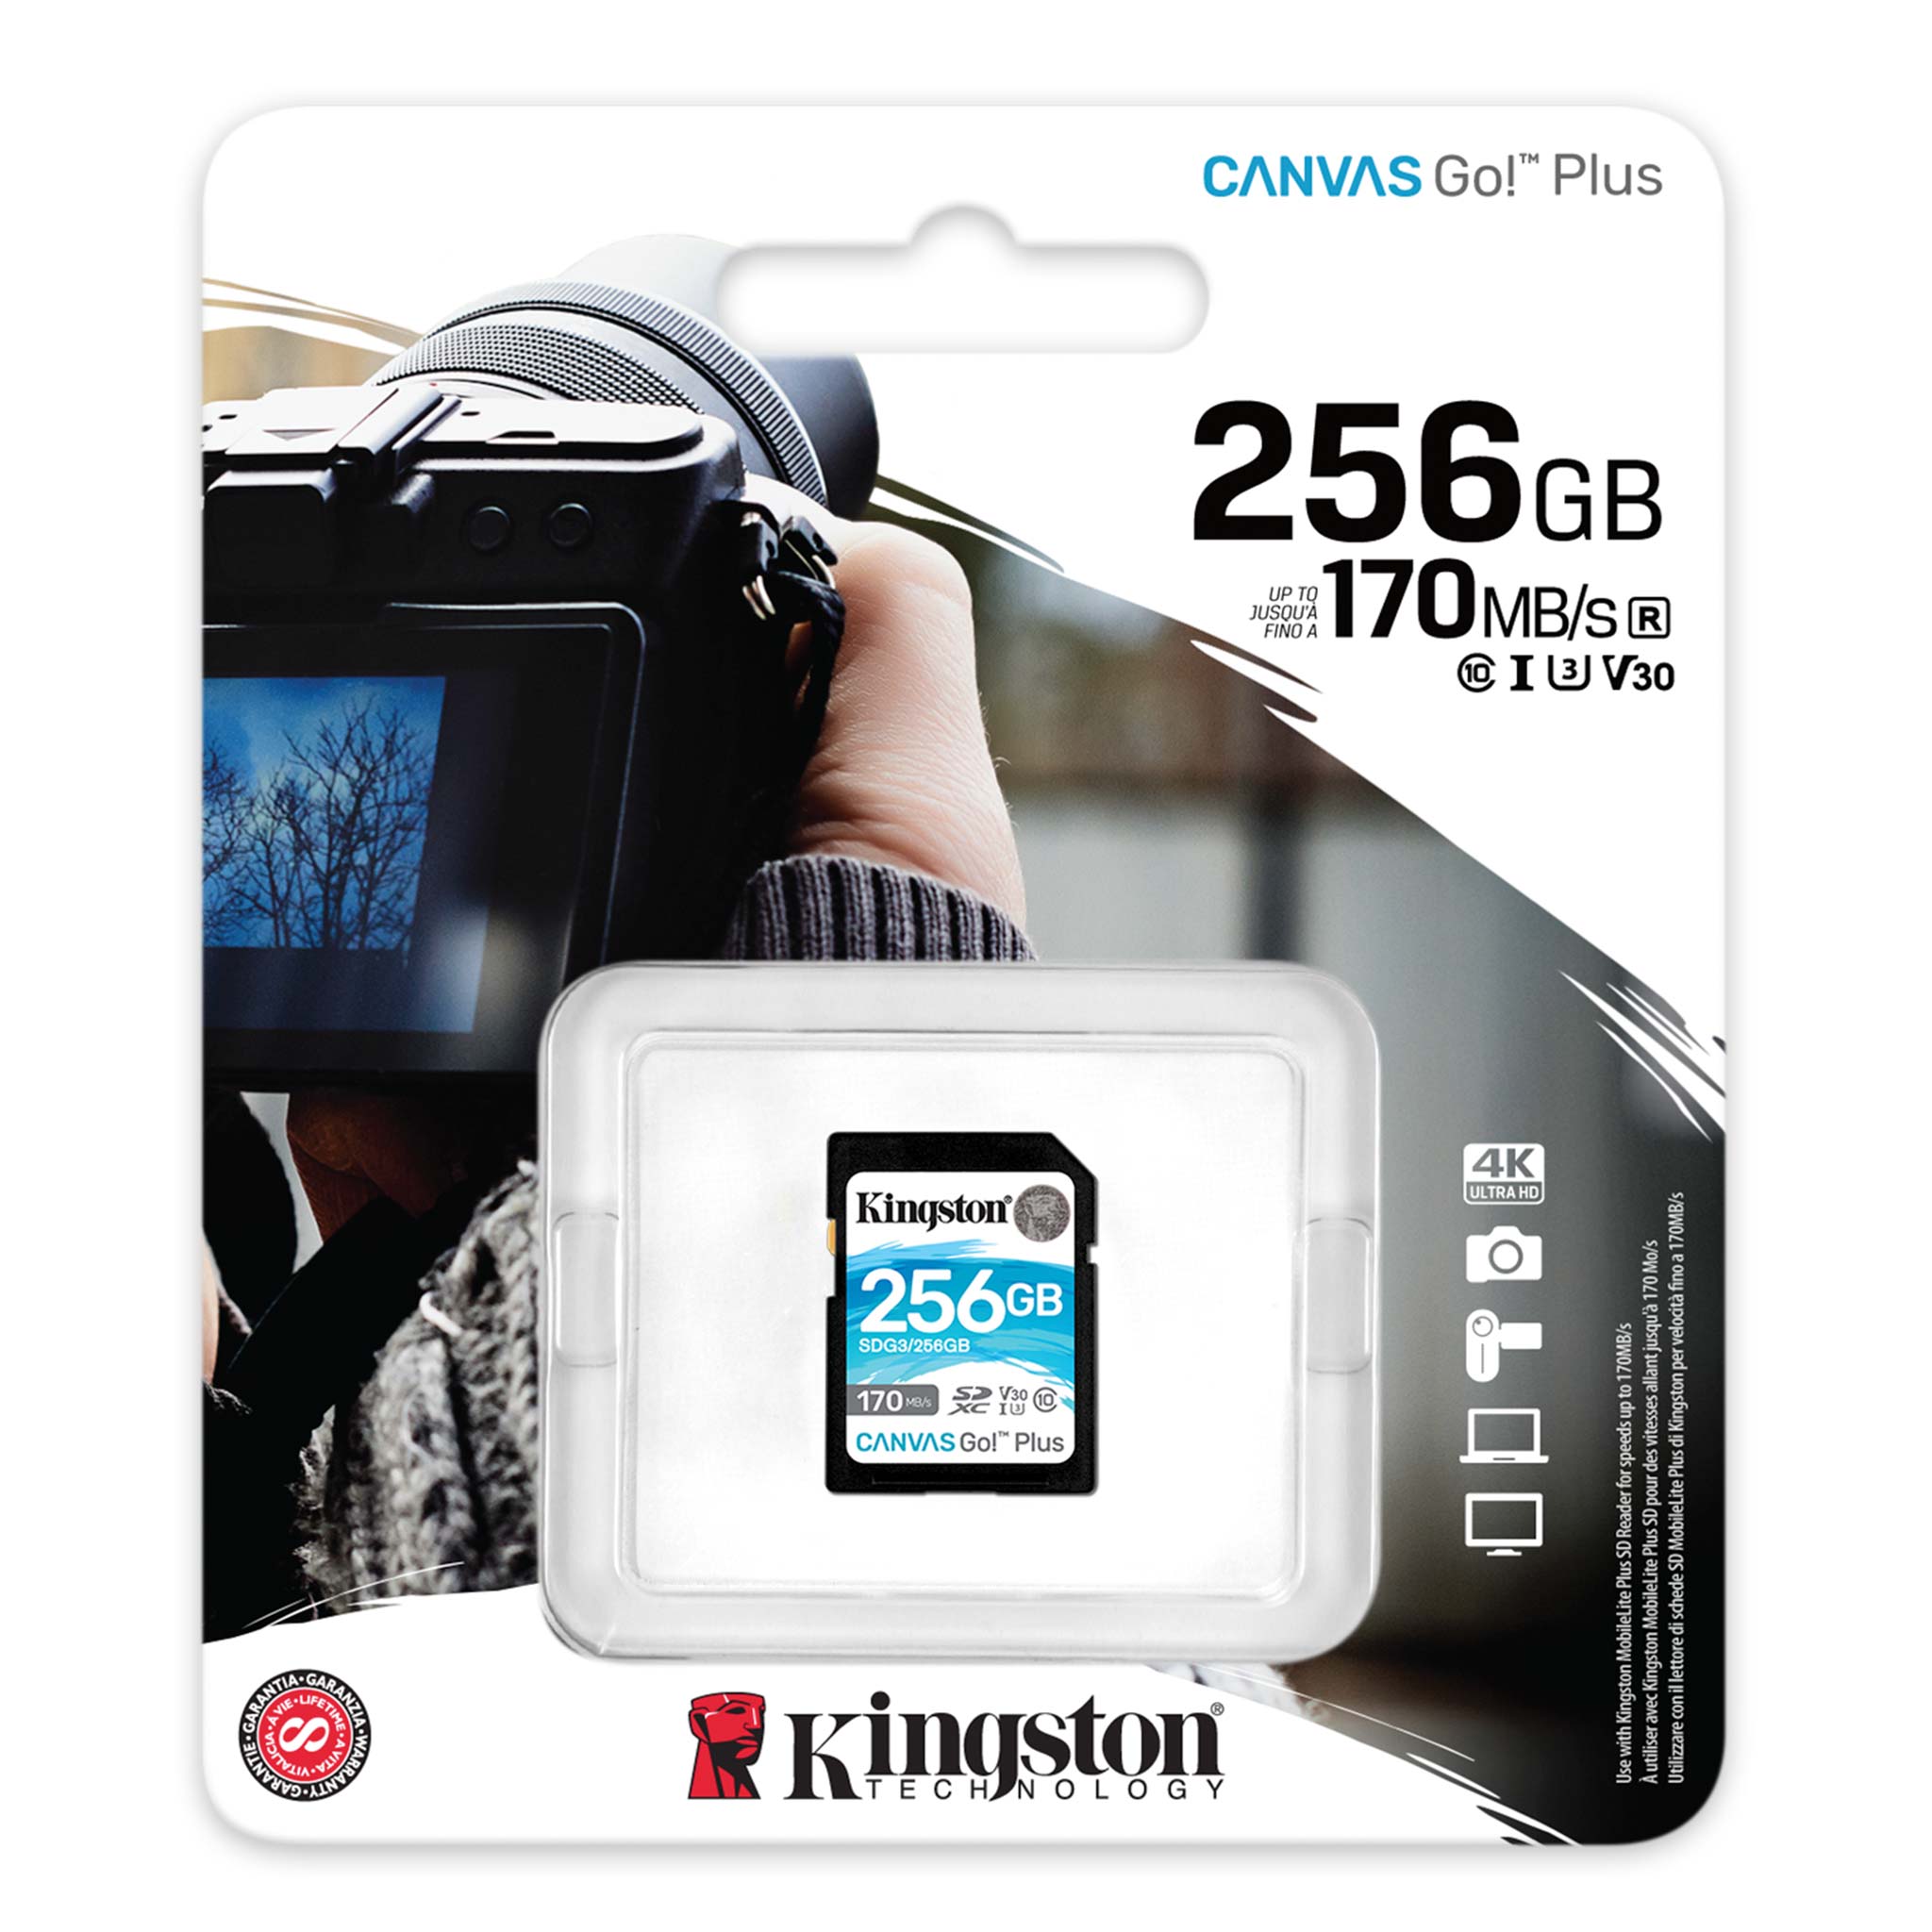 100MBs Works with Kingston Kingston 64GB Honor 8 Pro MicroSDXC Canvas Select Plus Card Verified by SanFlash.